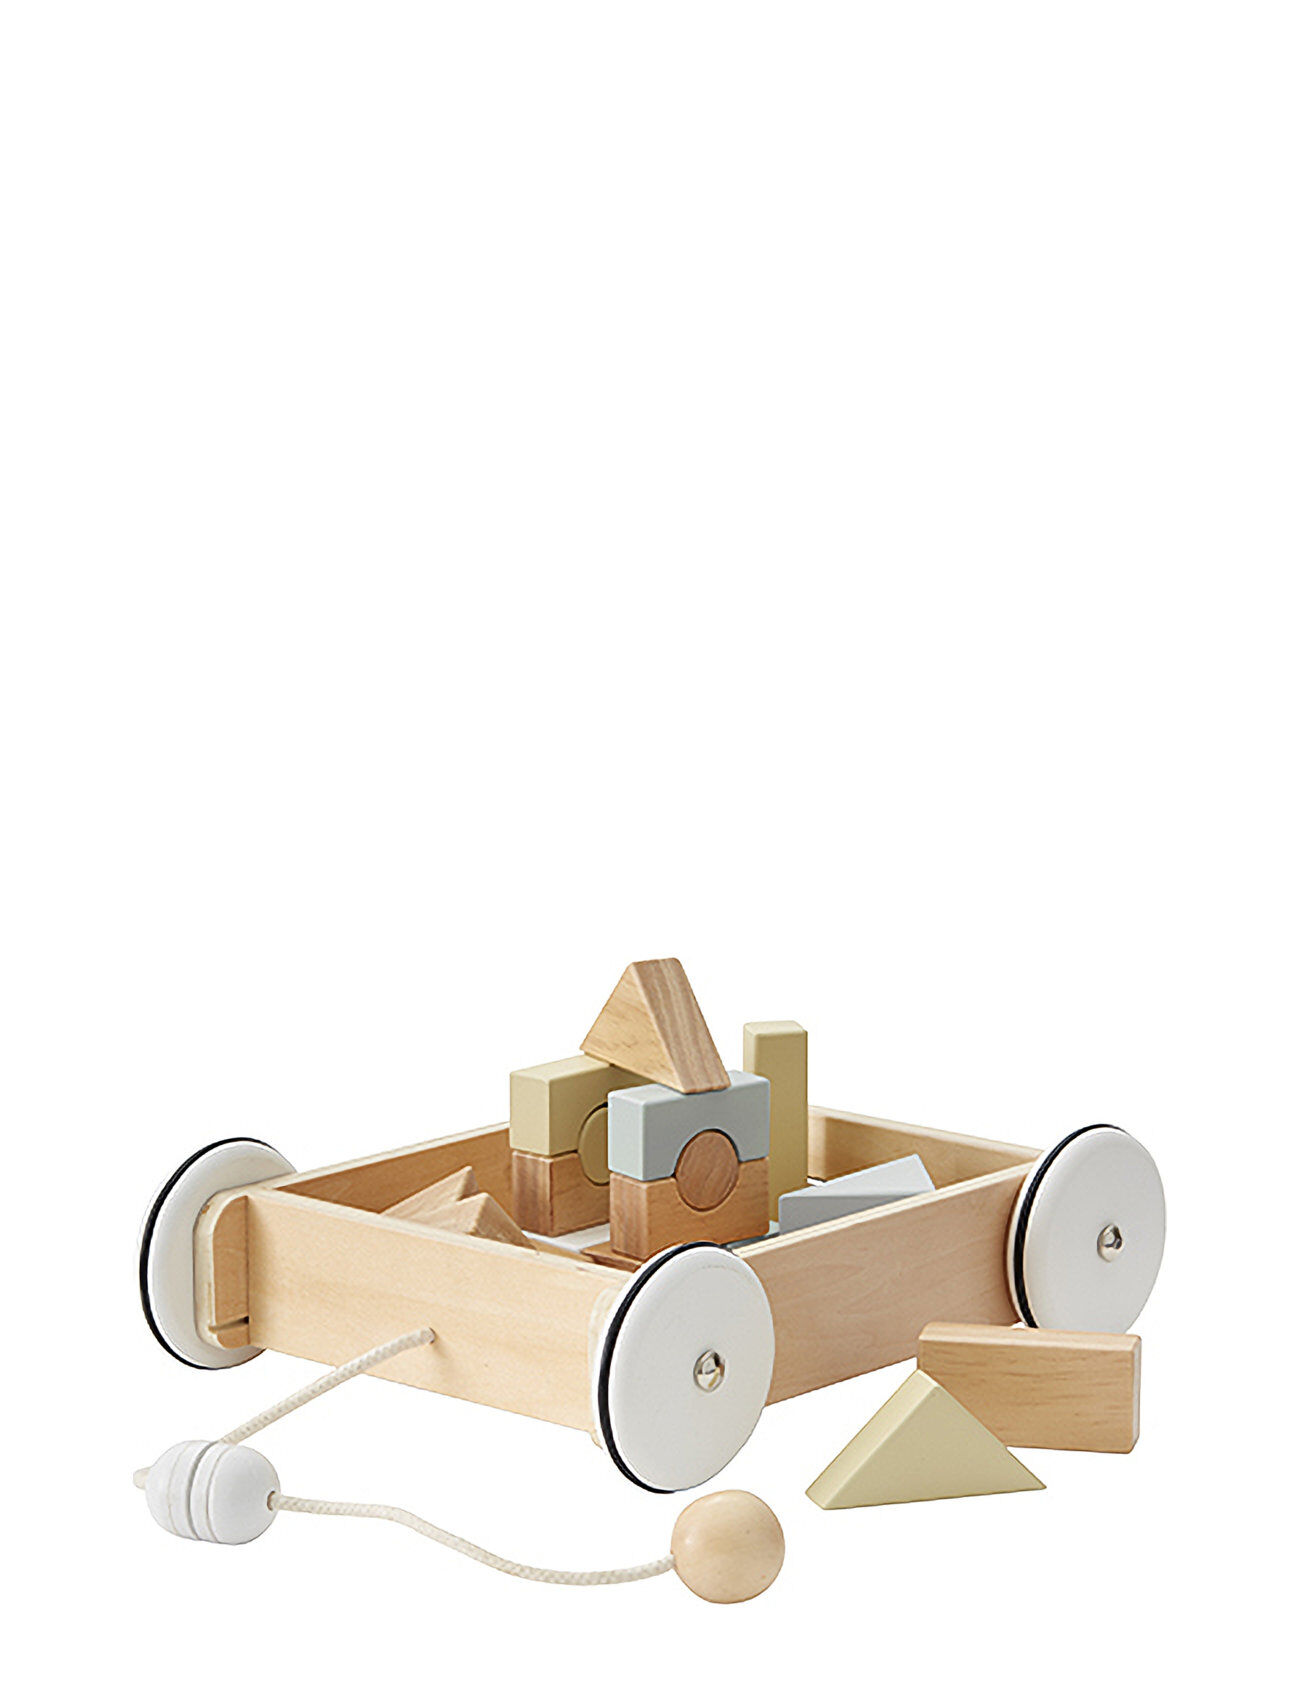 Kids Concept Wagon With Blocks Toys Building Sets & Blocks Building Blocks Grå Kids Concept